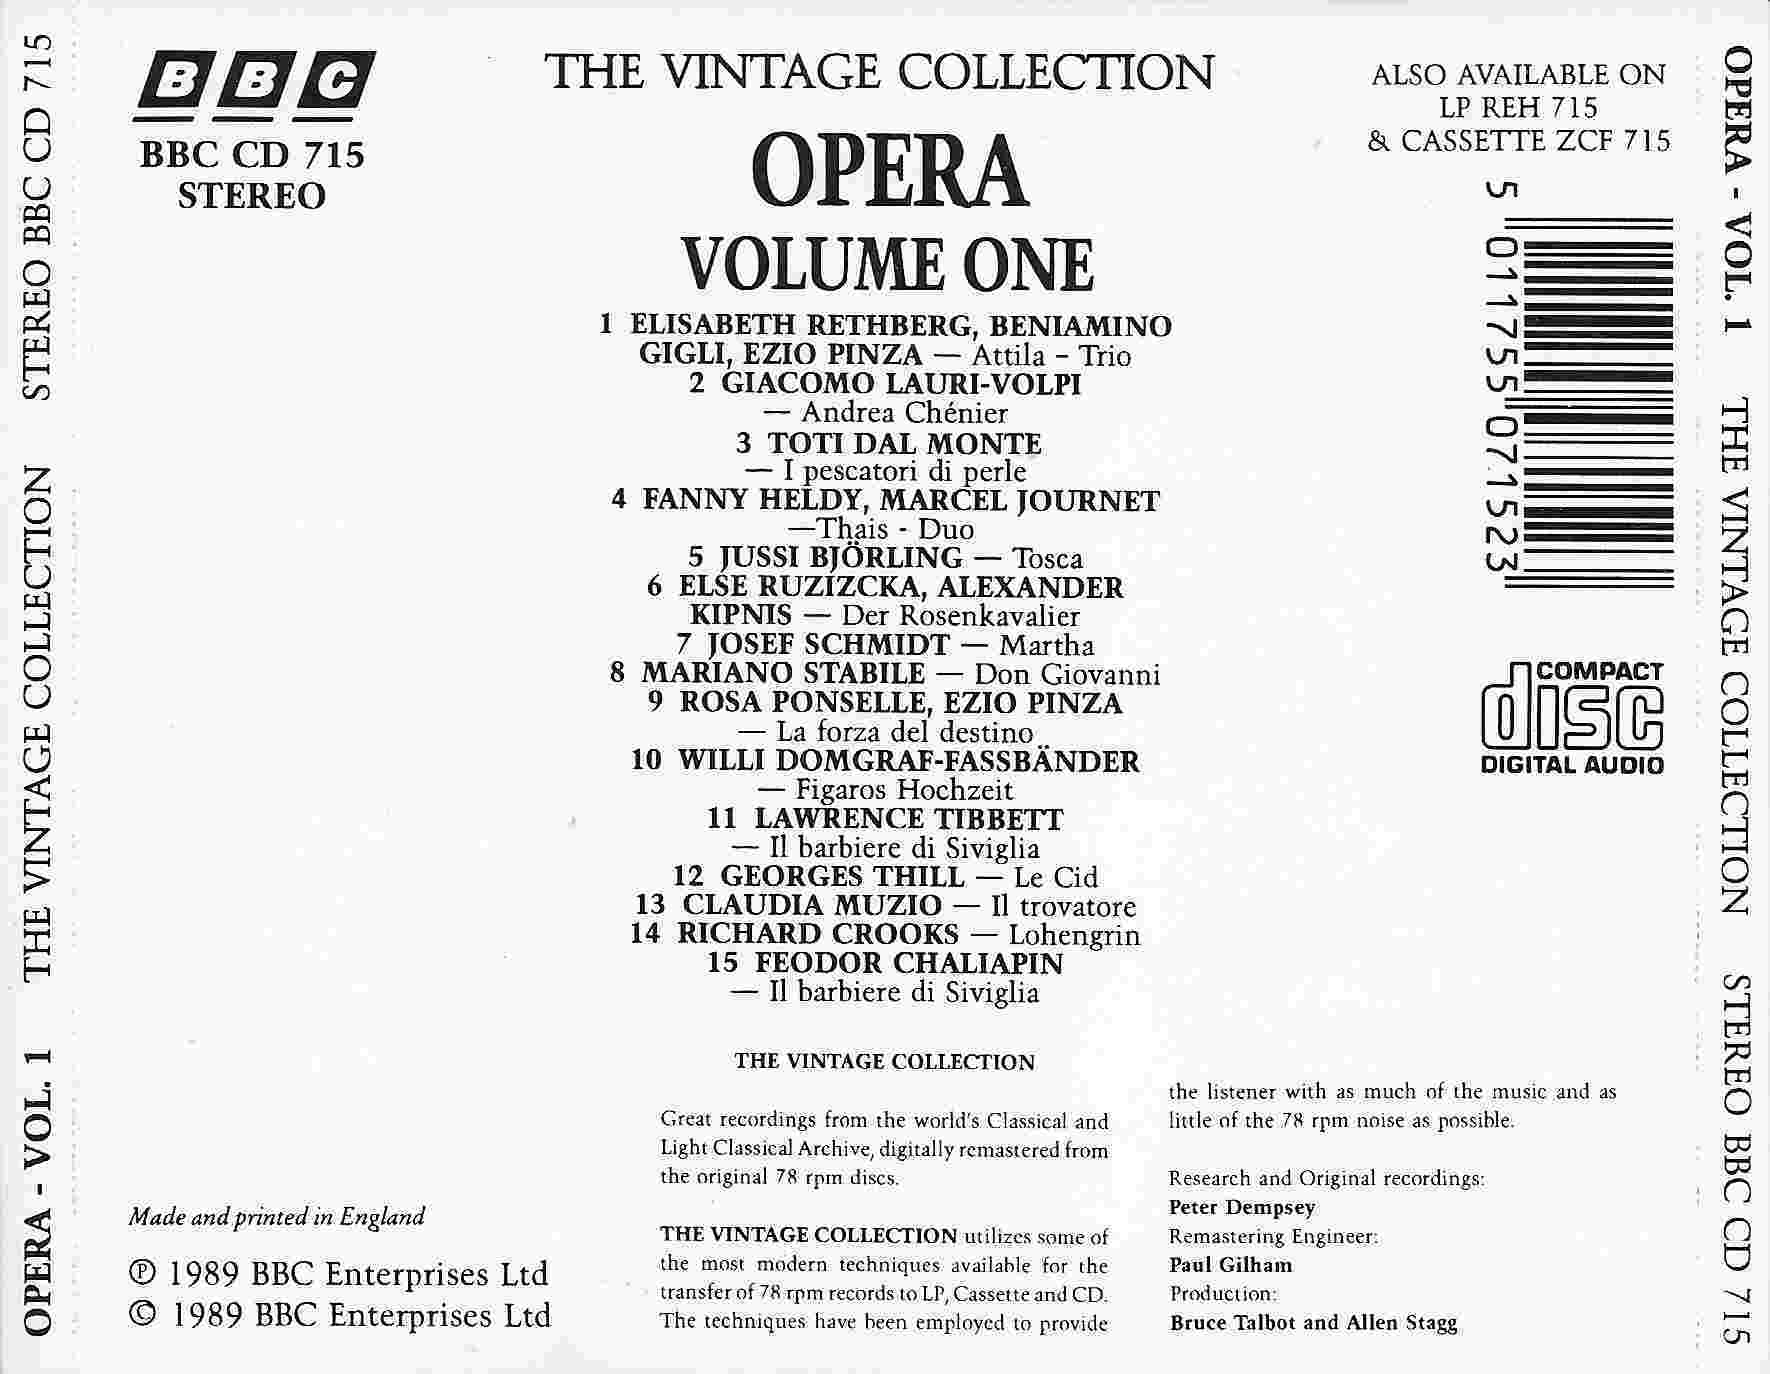 Back cover of BBCCD715